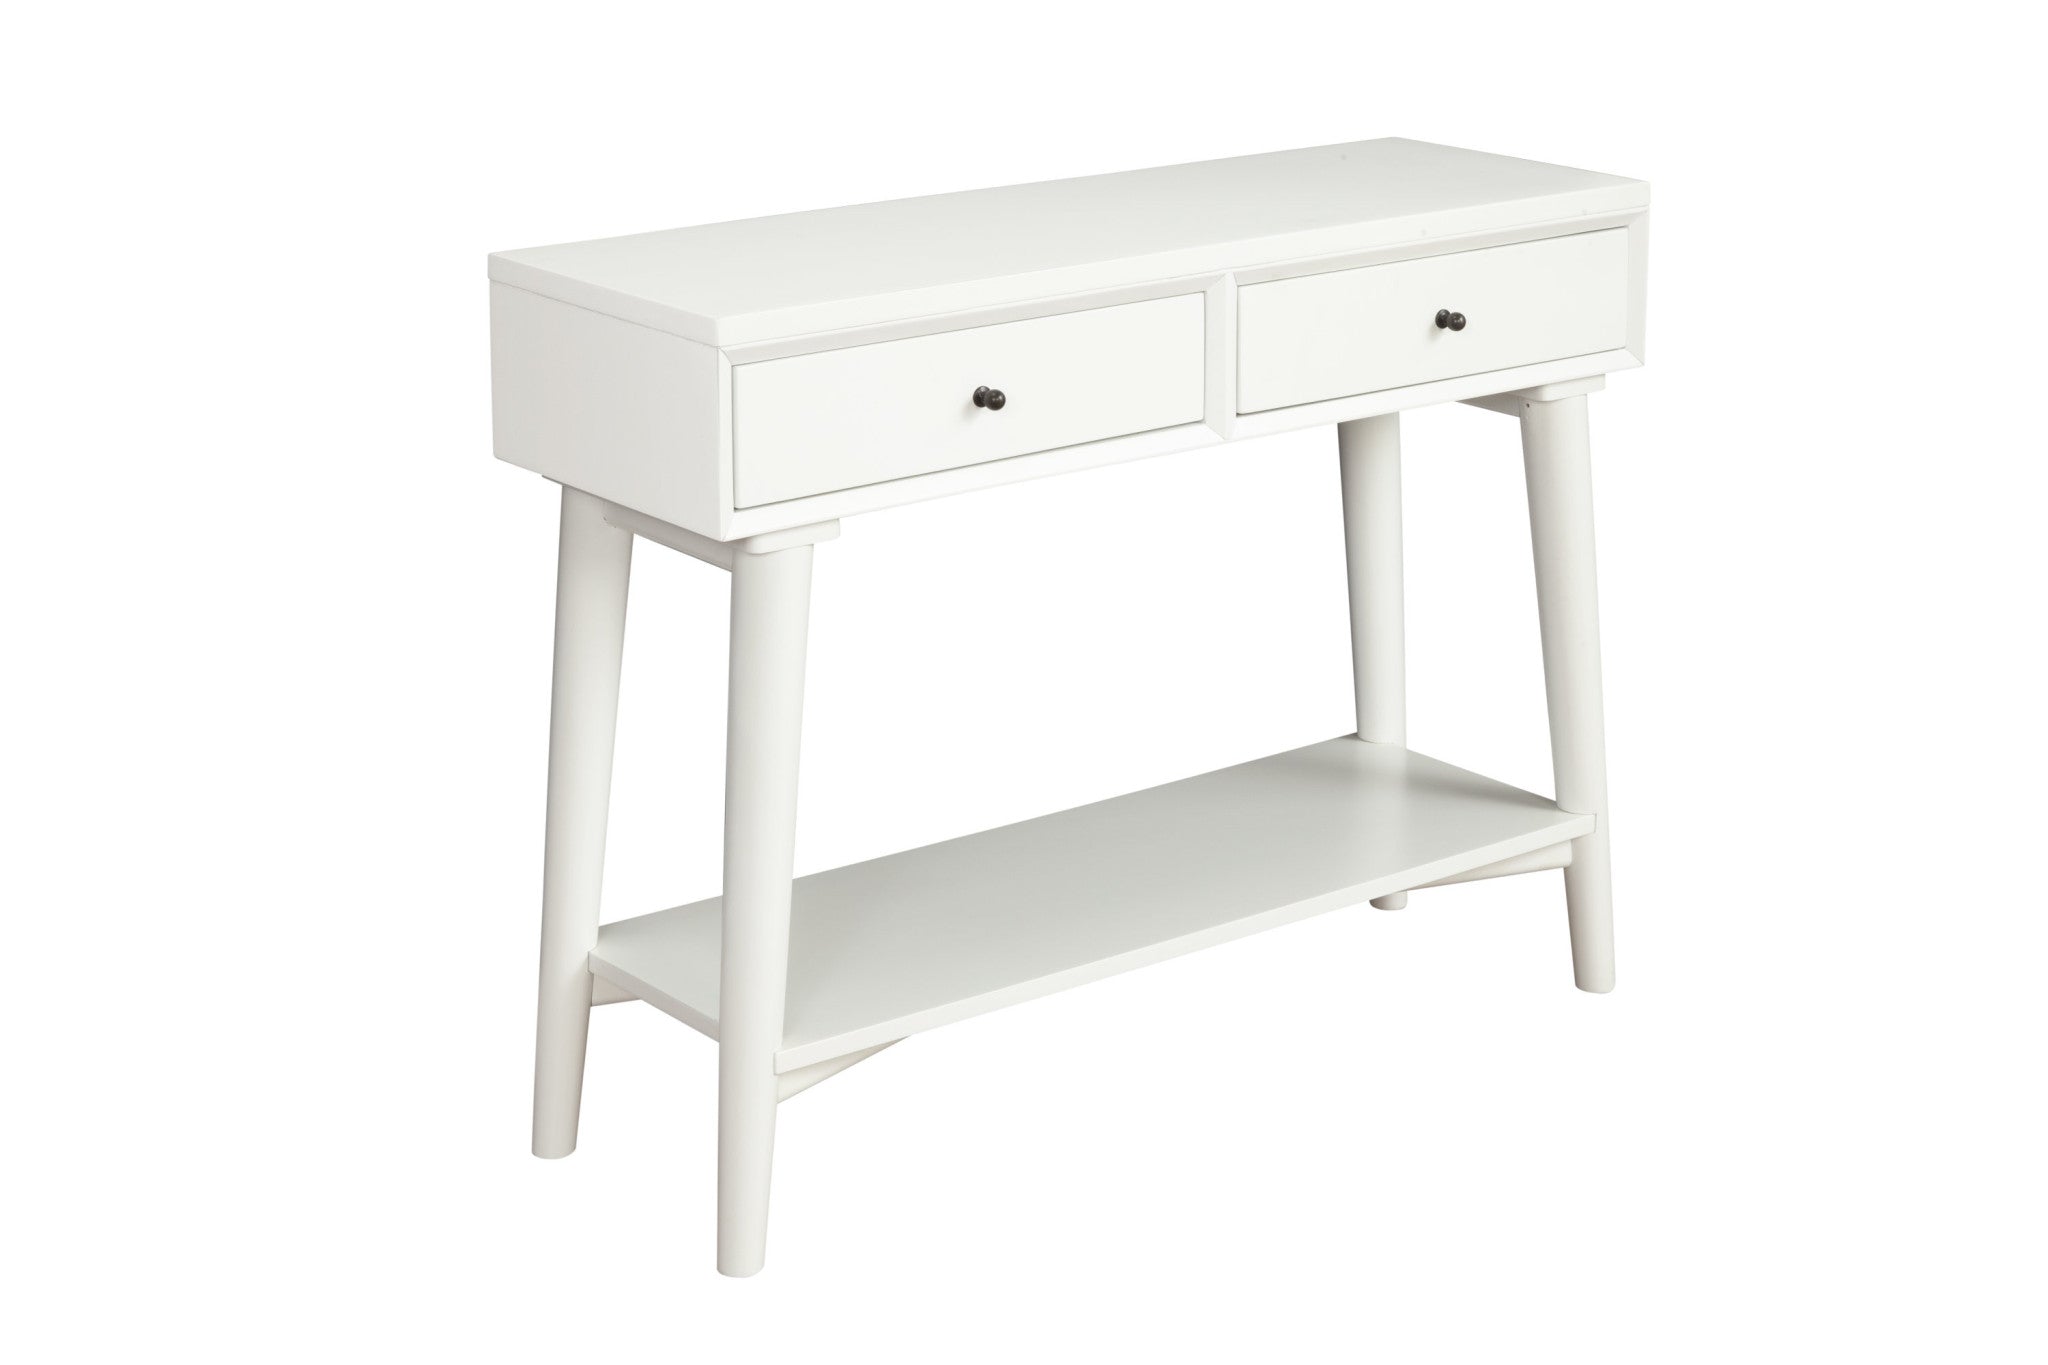 42" White Solid and Manufactured Wood Floor Shelf Console Table With Storage With Storage